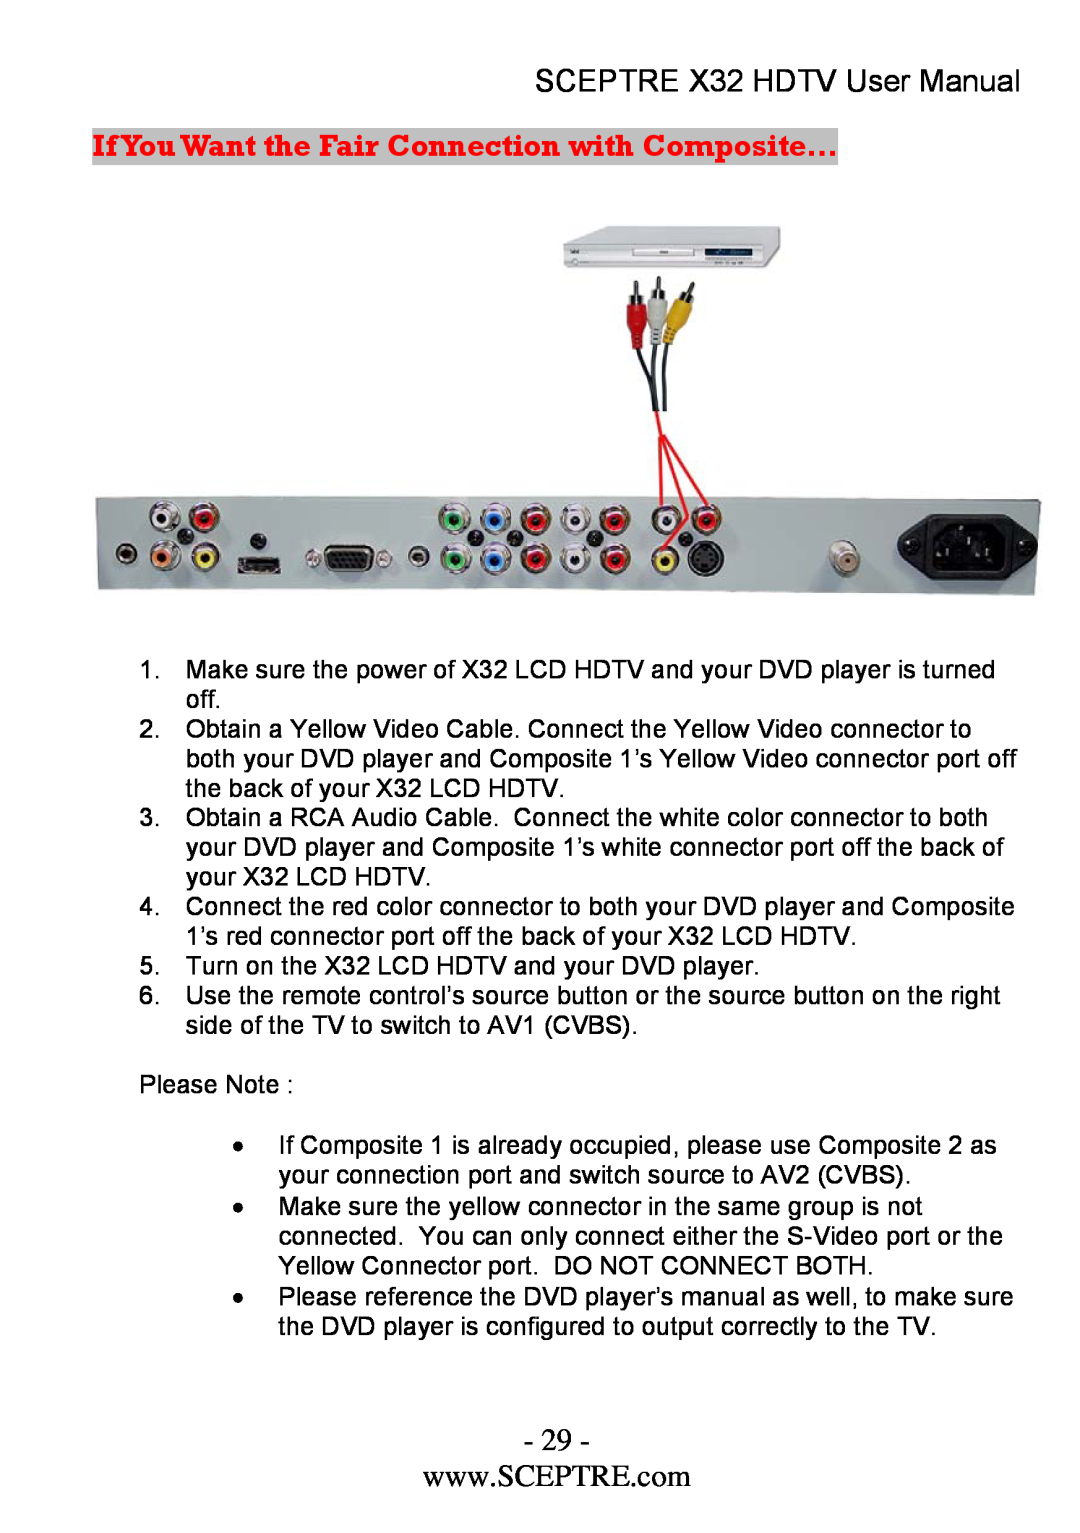 Sceptre Technologies x32 user manual If You Want the Fair Connection with Composite…, SCEPTRE X32 HDTV User Manual 